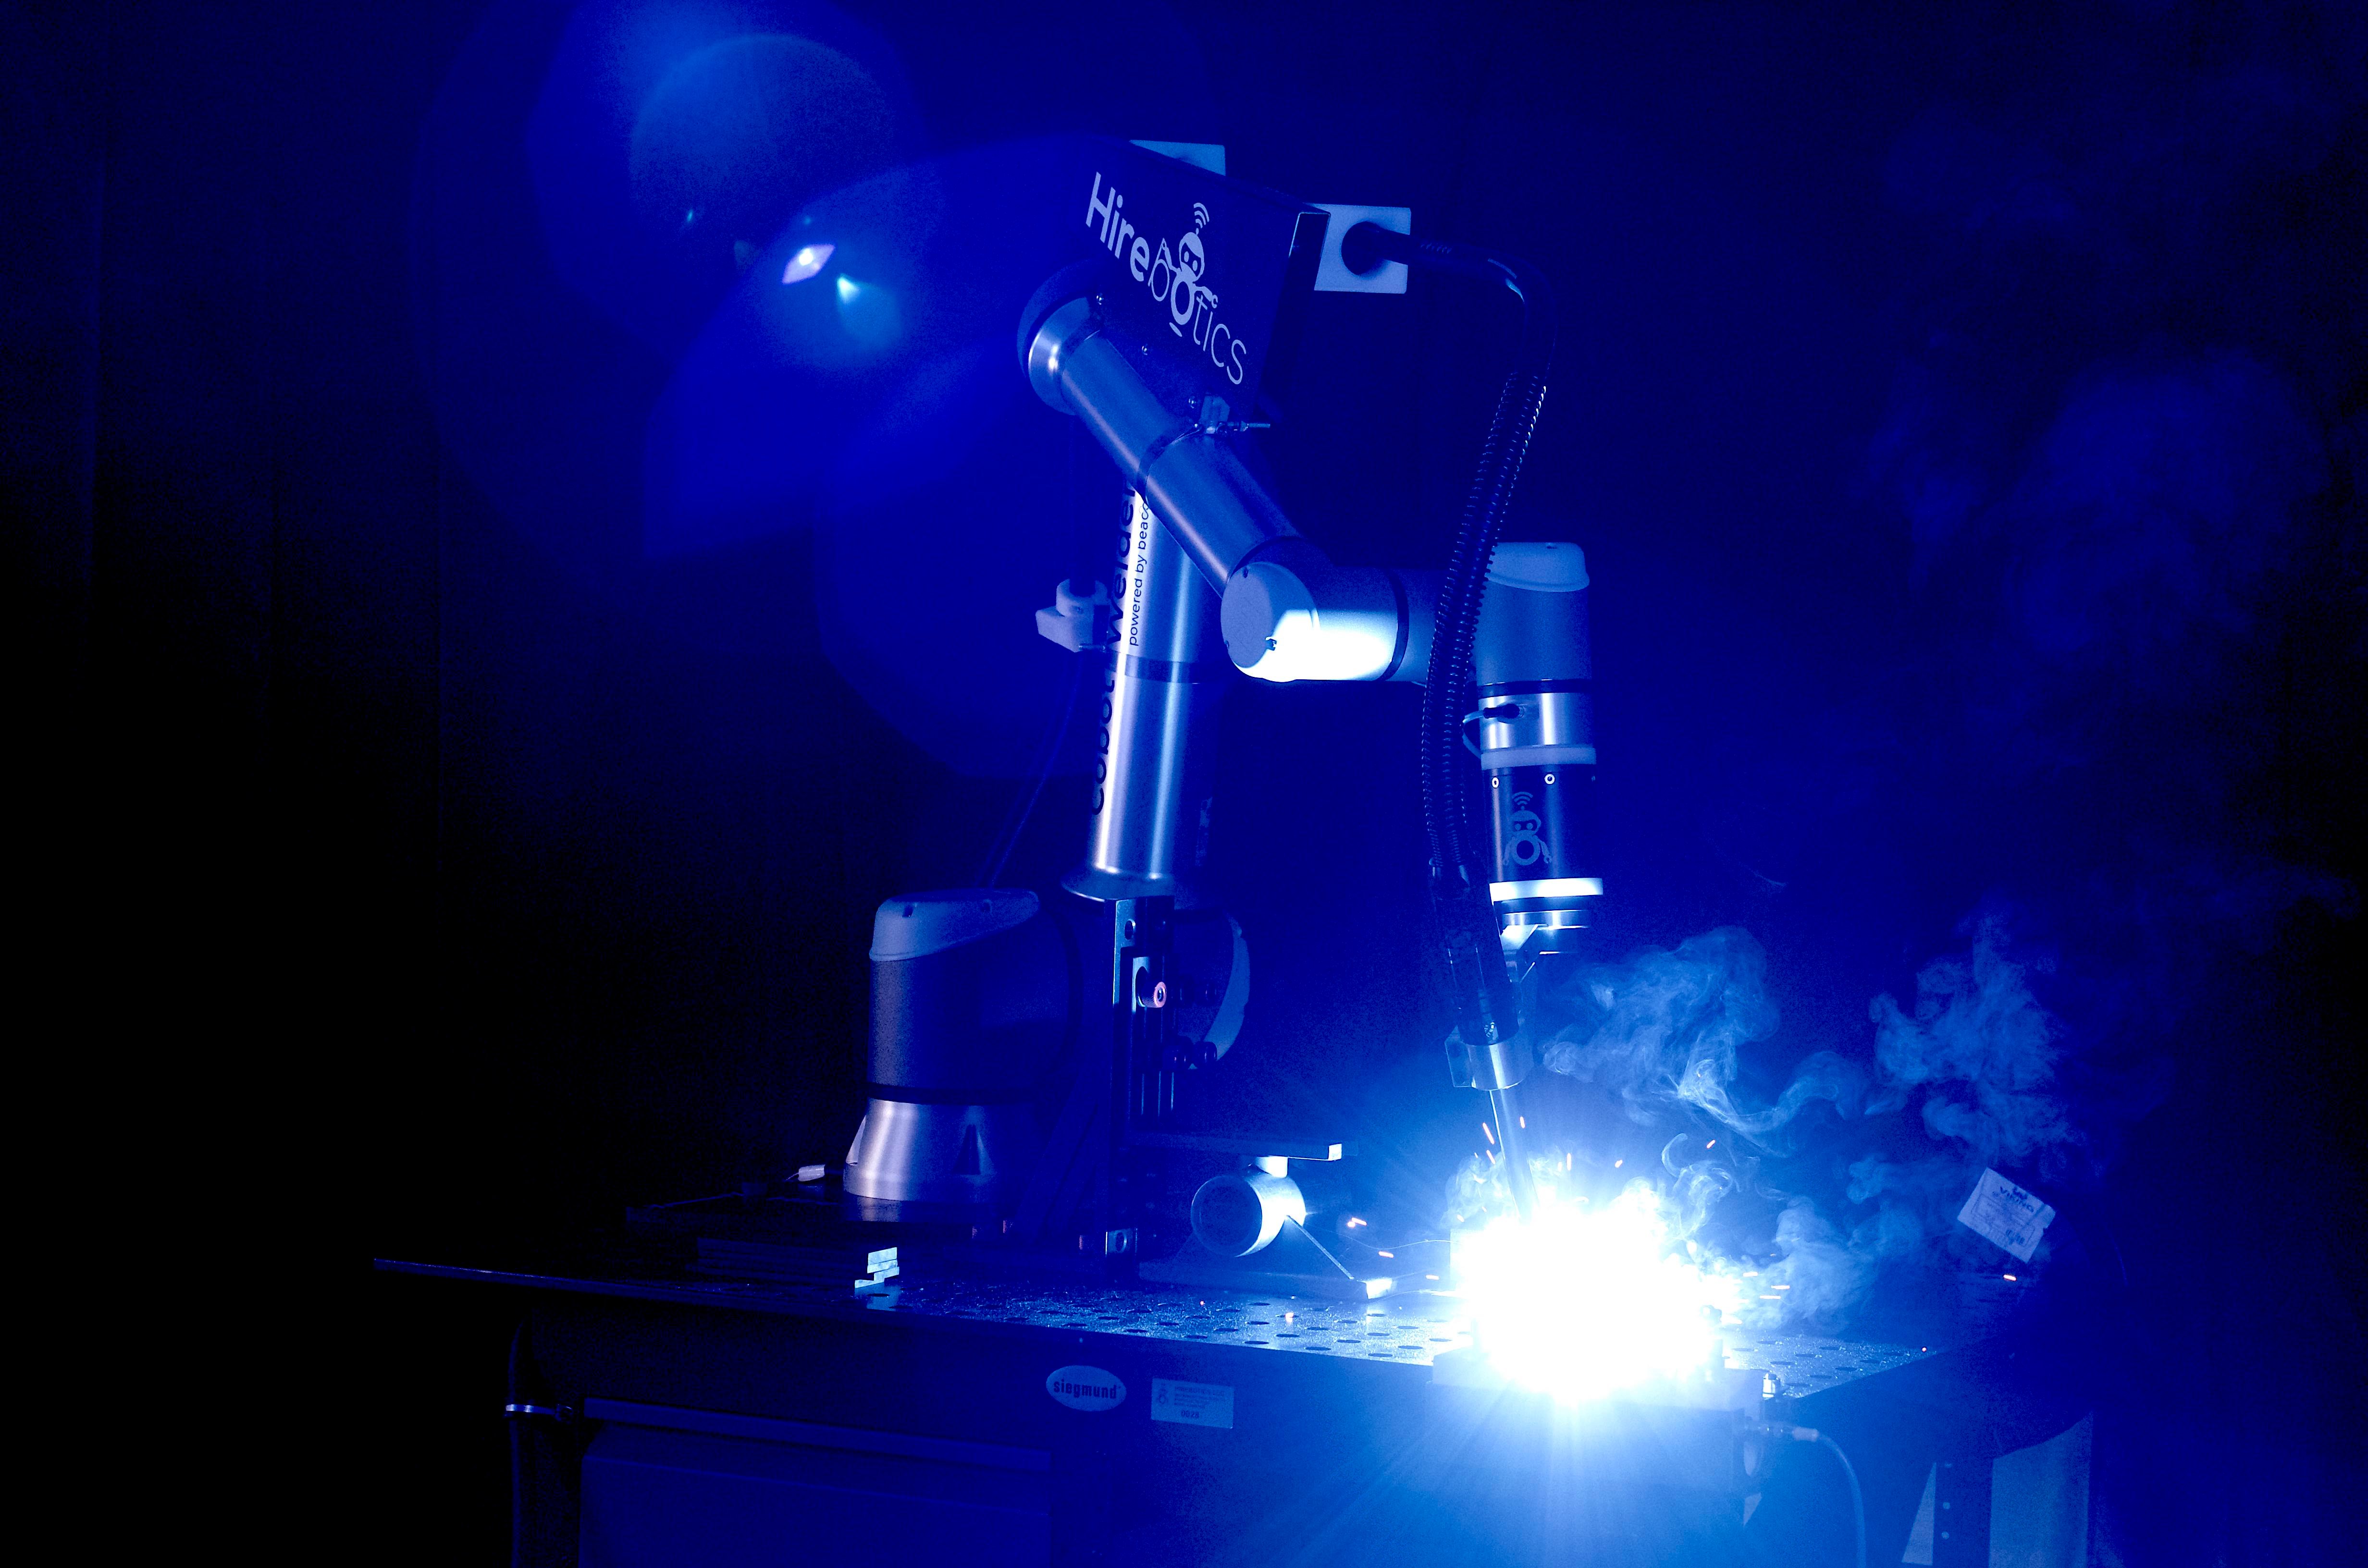 Cobot Welder, Powered by Beacon™